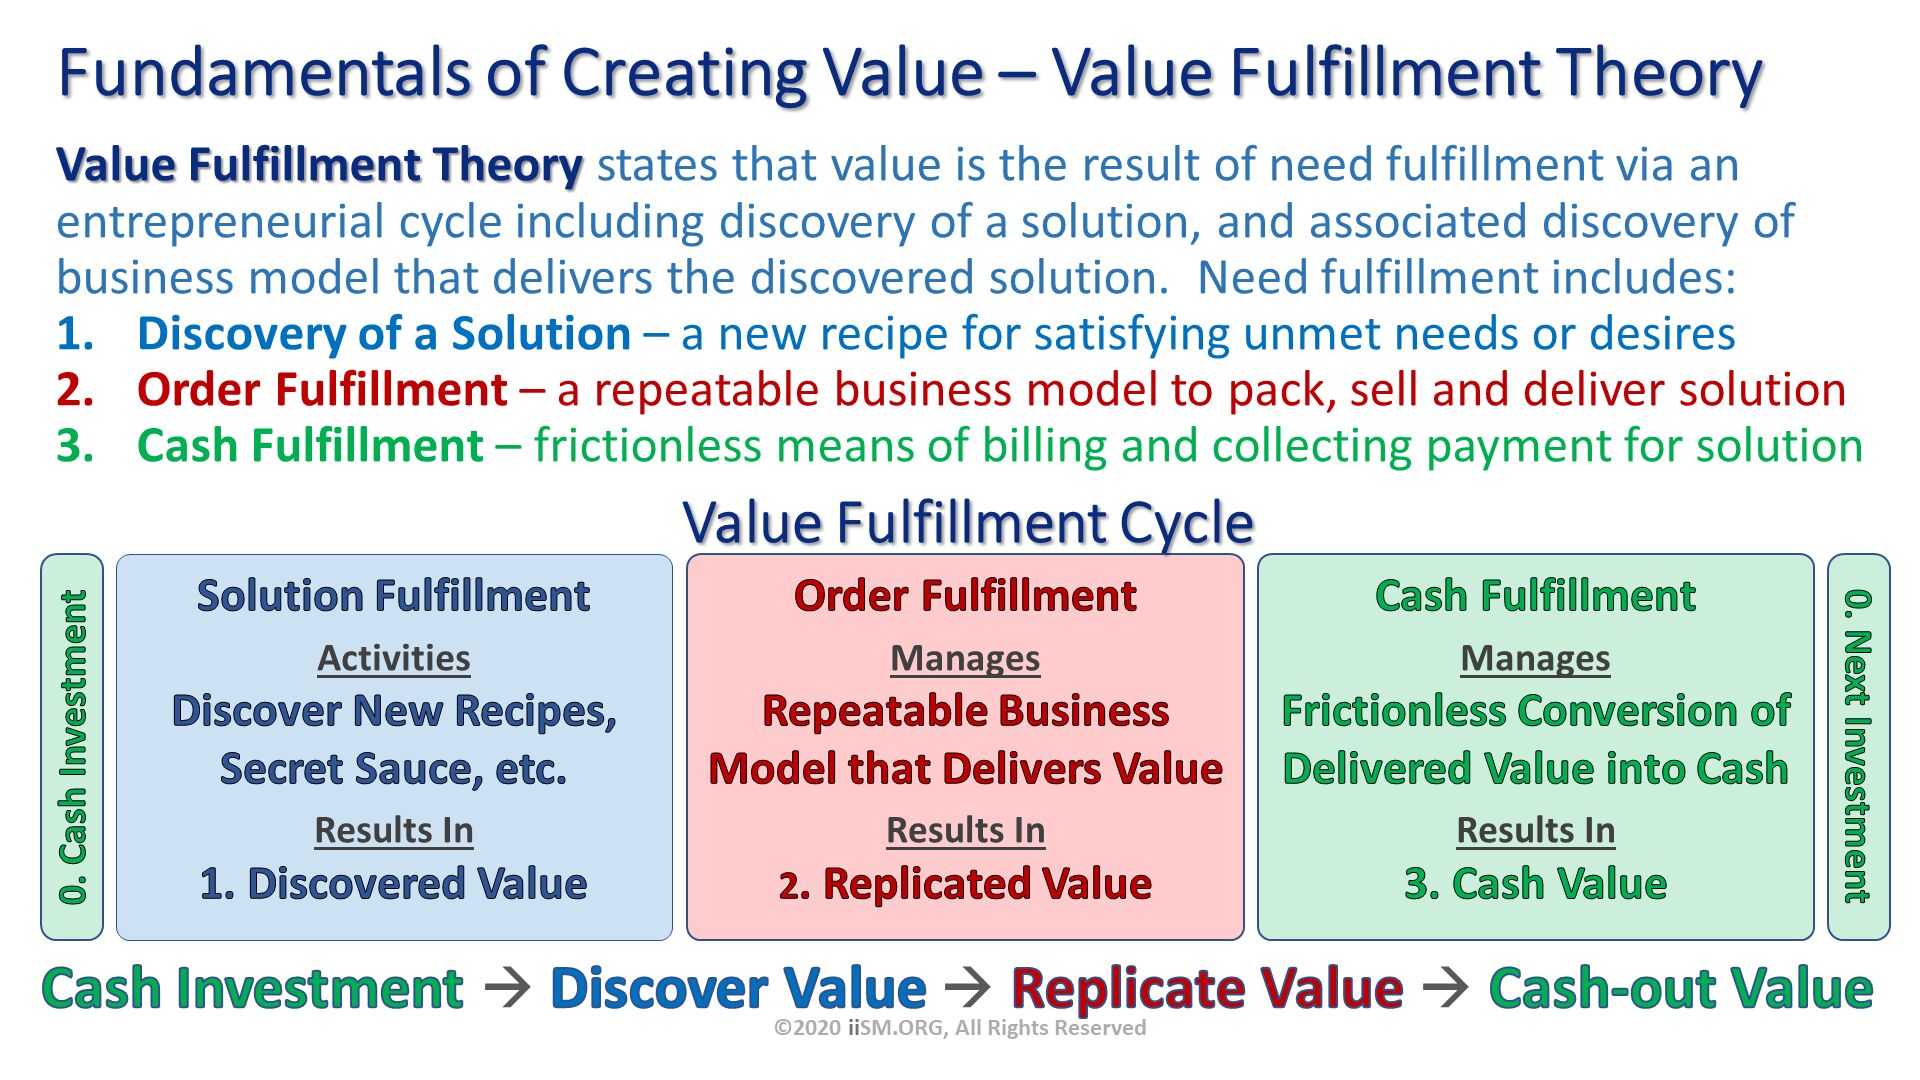 Fundamentals of Creating Value – Value Fulfillment Theory. Value Fulfillment Theory states that value is the result of need fulfillment via an entrepreneurial cycle including discovery of a solution, and associated discovery of business model that delivers the discovered solution.  Need fulfillment includes:
Discovery of a Solution – a new recipe for satisfying unmet needs or desires 
Order Fulfillment – a repeatable business model to pack, sell and deliver solution
Cash Fulfillment – frictionless means of billing and collecting payment for solution. Cash Investment  Discover Value  Replicate Value  Cash-out Value. Value Fulfillment Cycle. ©2020 iiSM.ORG, All Rights Reserved. 